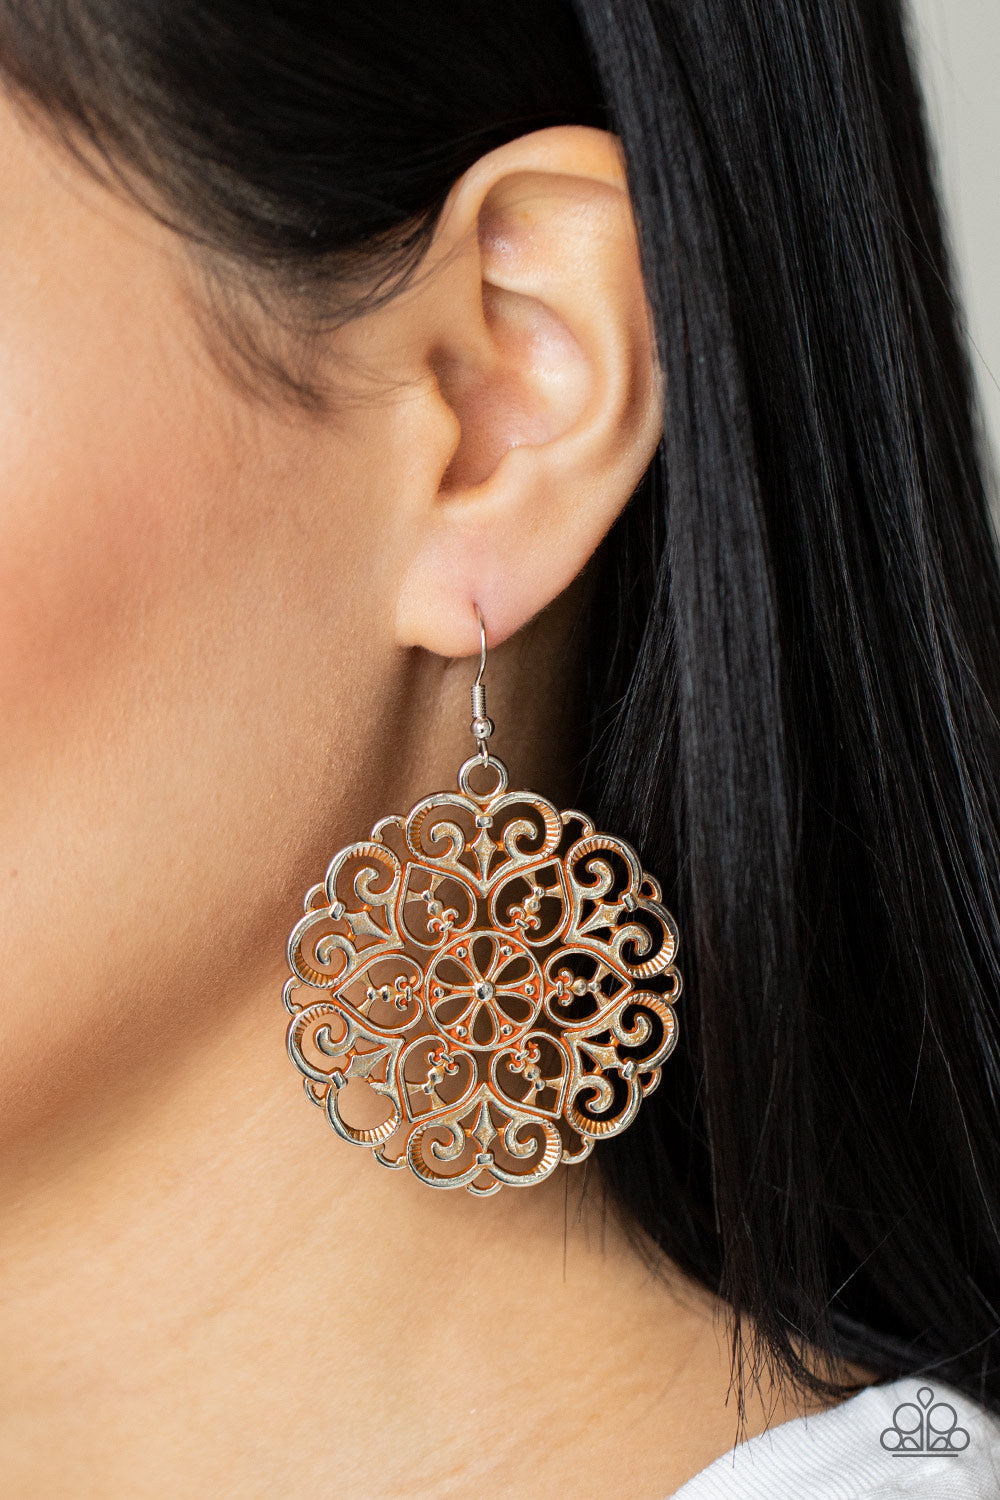 MANDALA Effect - Orange and Silver Stylish Fashion Earrings - Paparazzi Accessories - Brushed in a rustic orange finish, an oversized mandala-like silver frame swings from the ear for a seasonal pop of color. Earring attaches to a standard fishhook fitting. Sold as one pair of earrings.